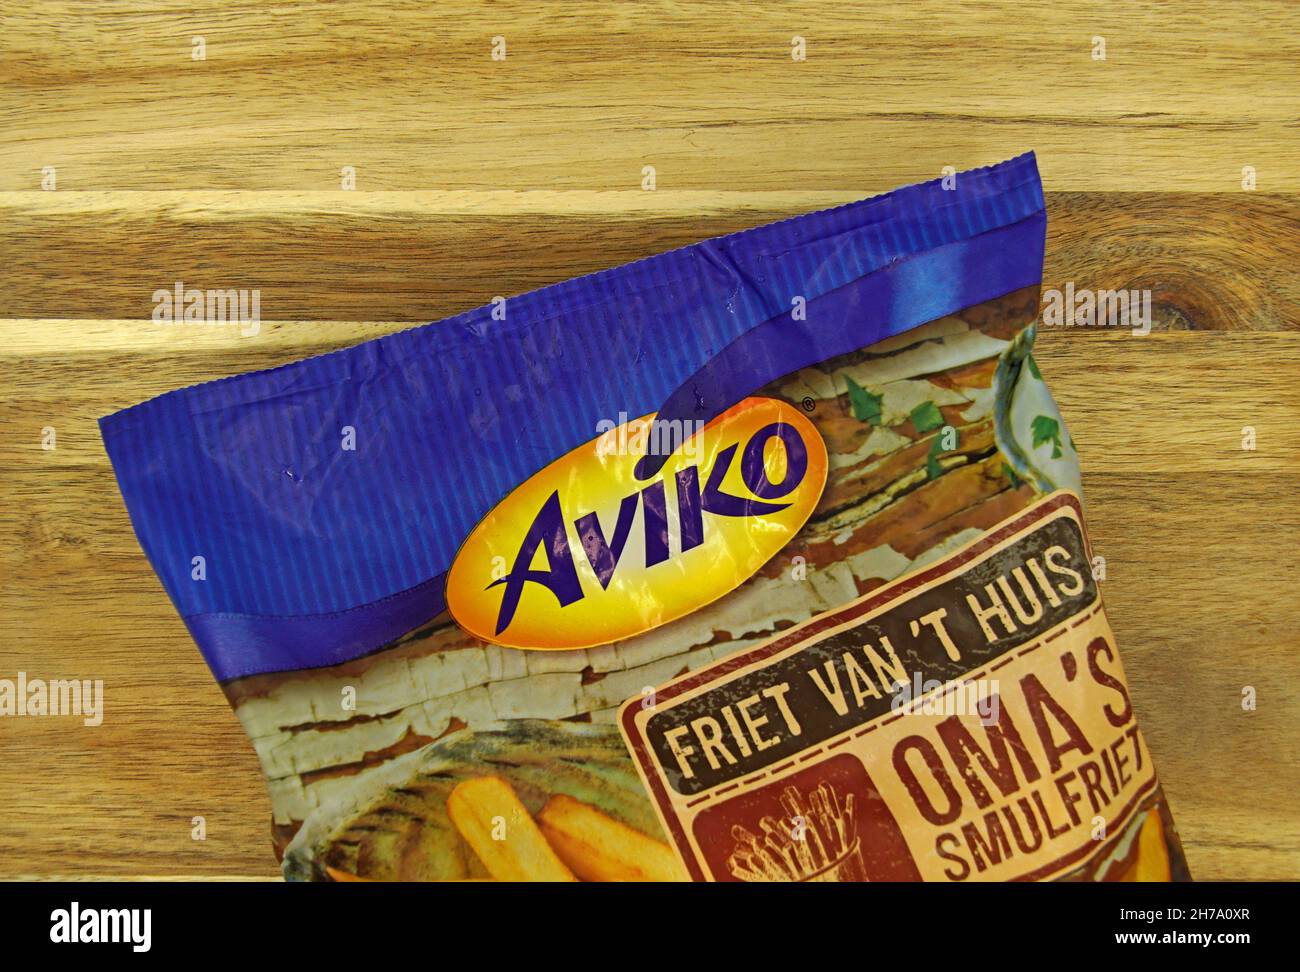 Zaandam, the Netherlands - September 10, 2021: Package of Aviko Oma's smulfriet Fries on a kitchen table. Stock Photo